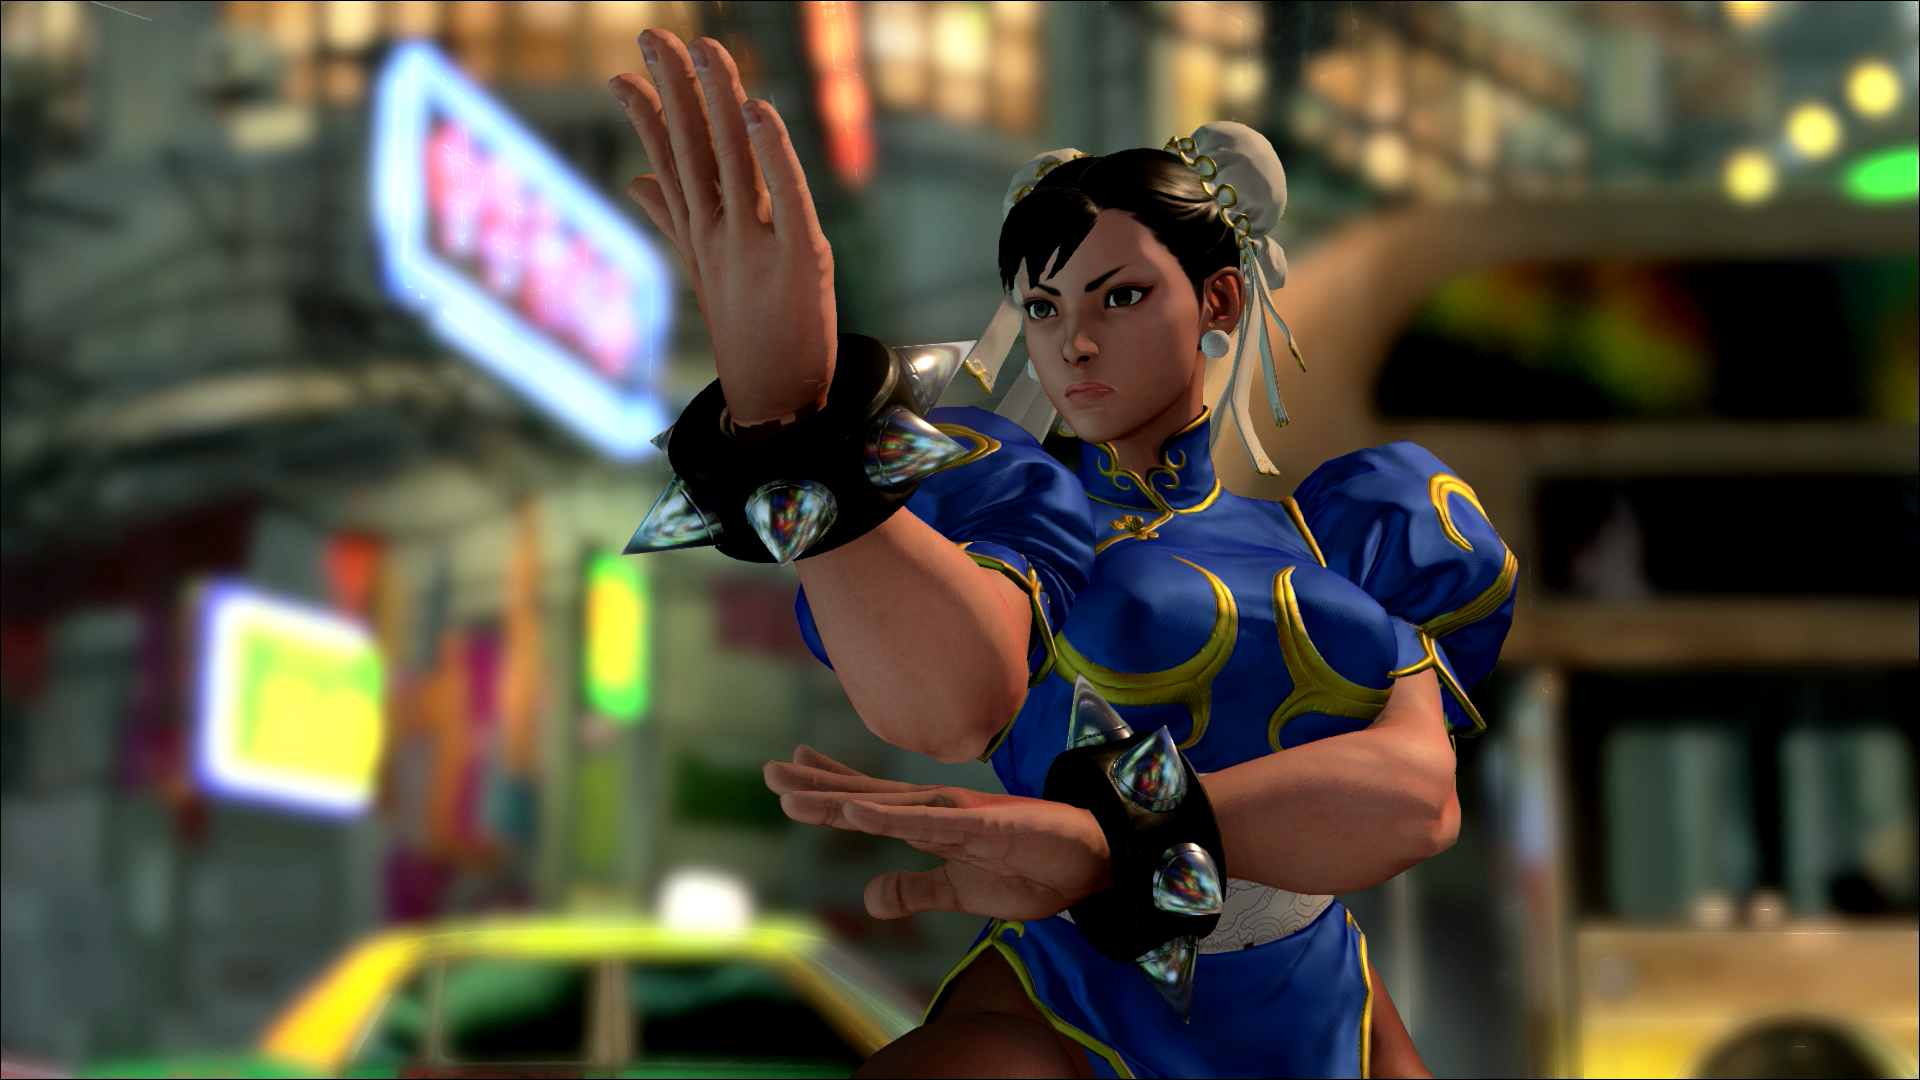 Street Fighter V Originally Featured Photorealistic Graphics